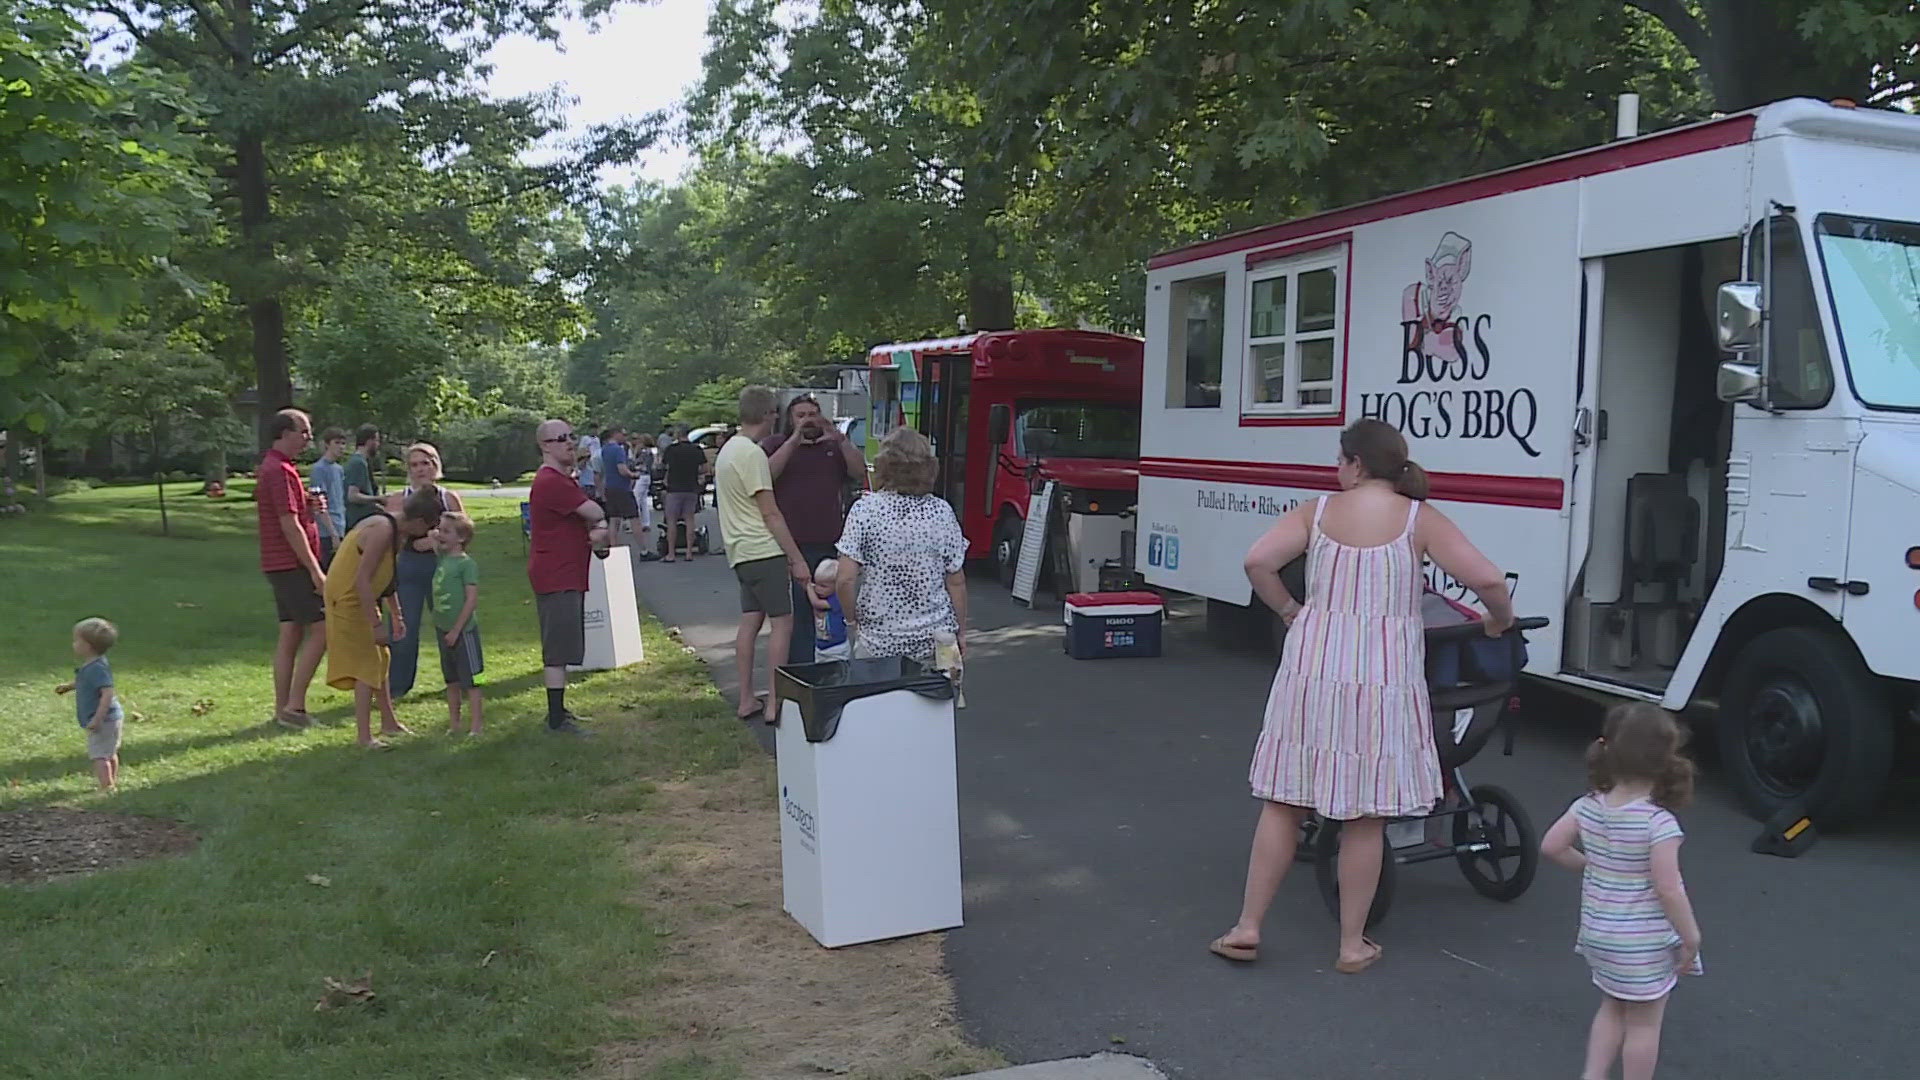 The next Food Truck Friday will be on Aug. 6.